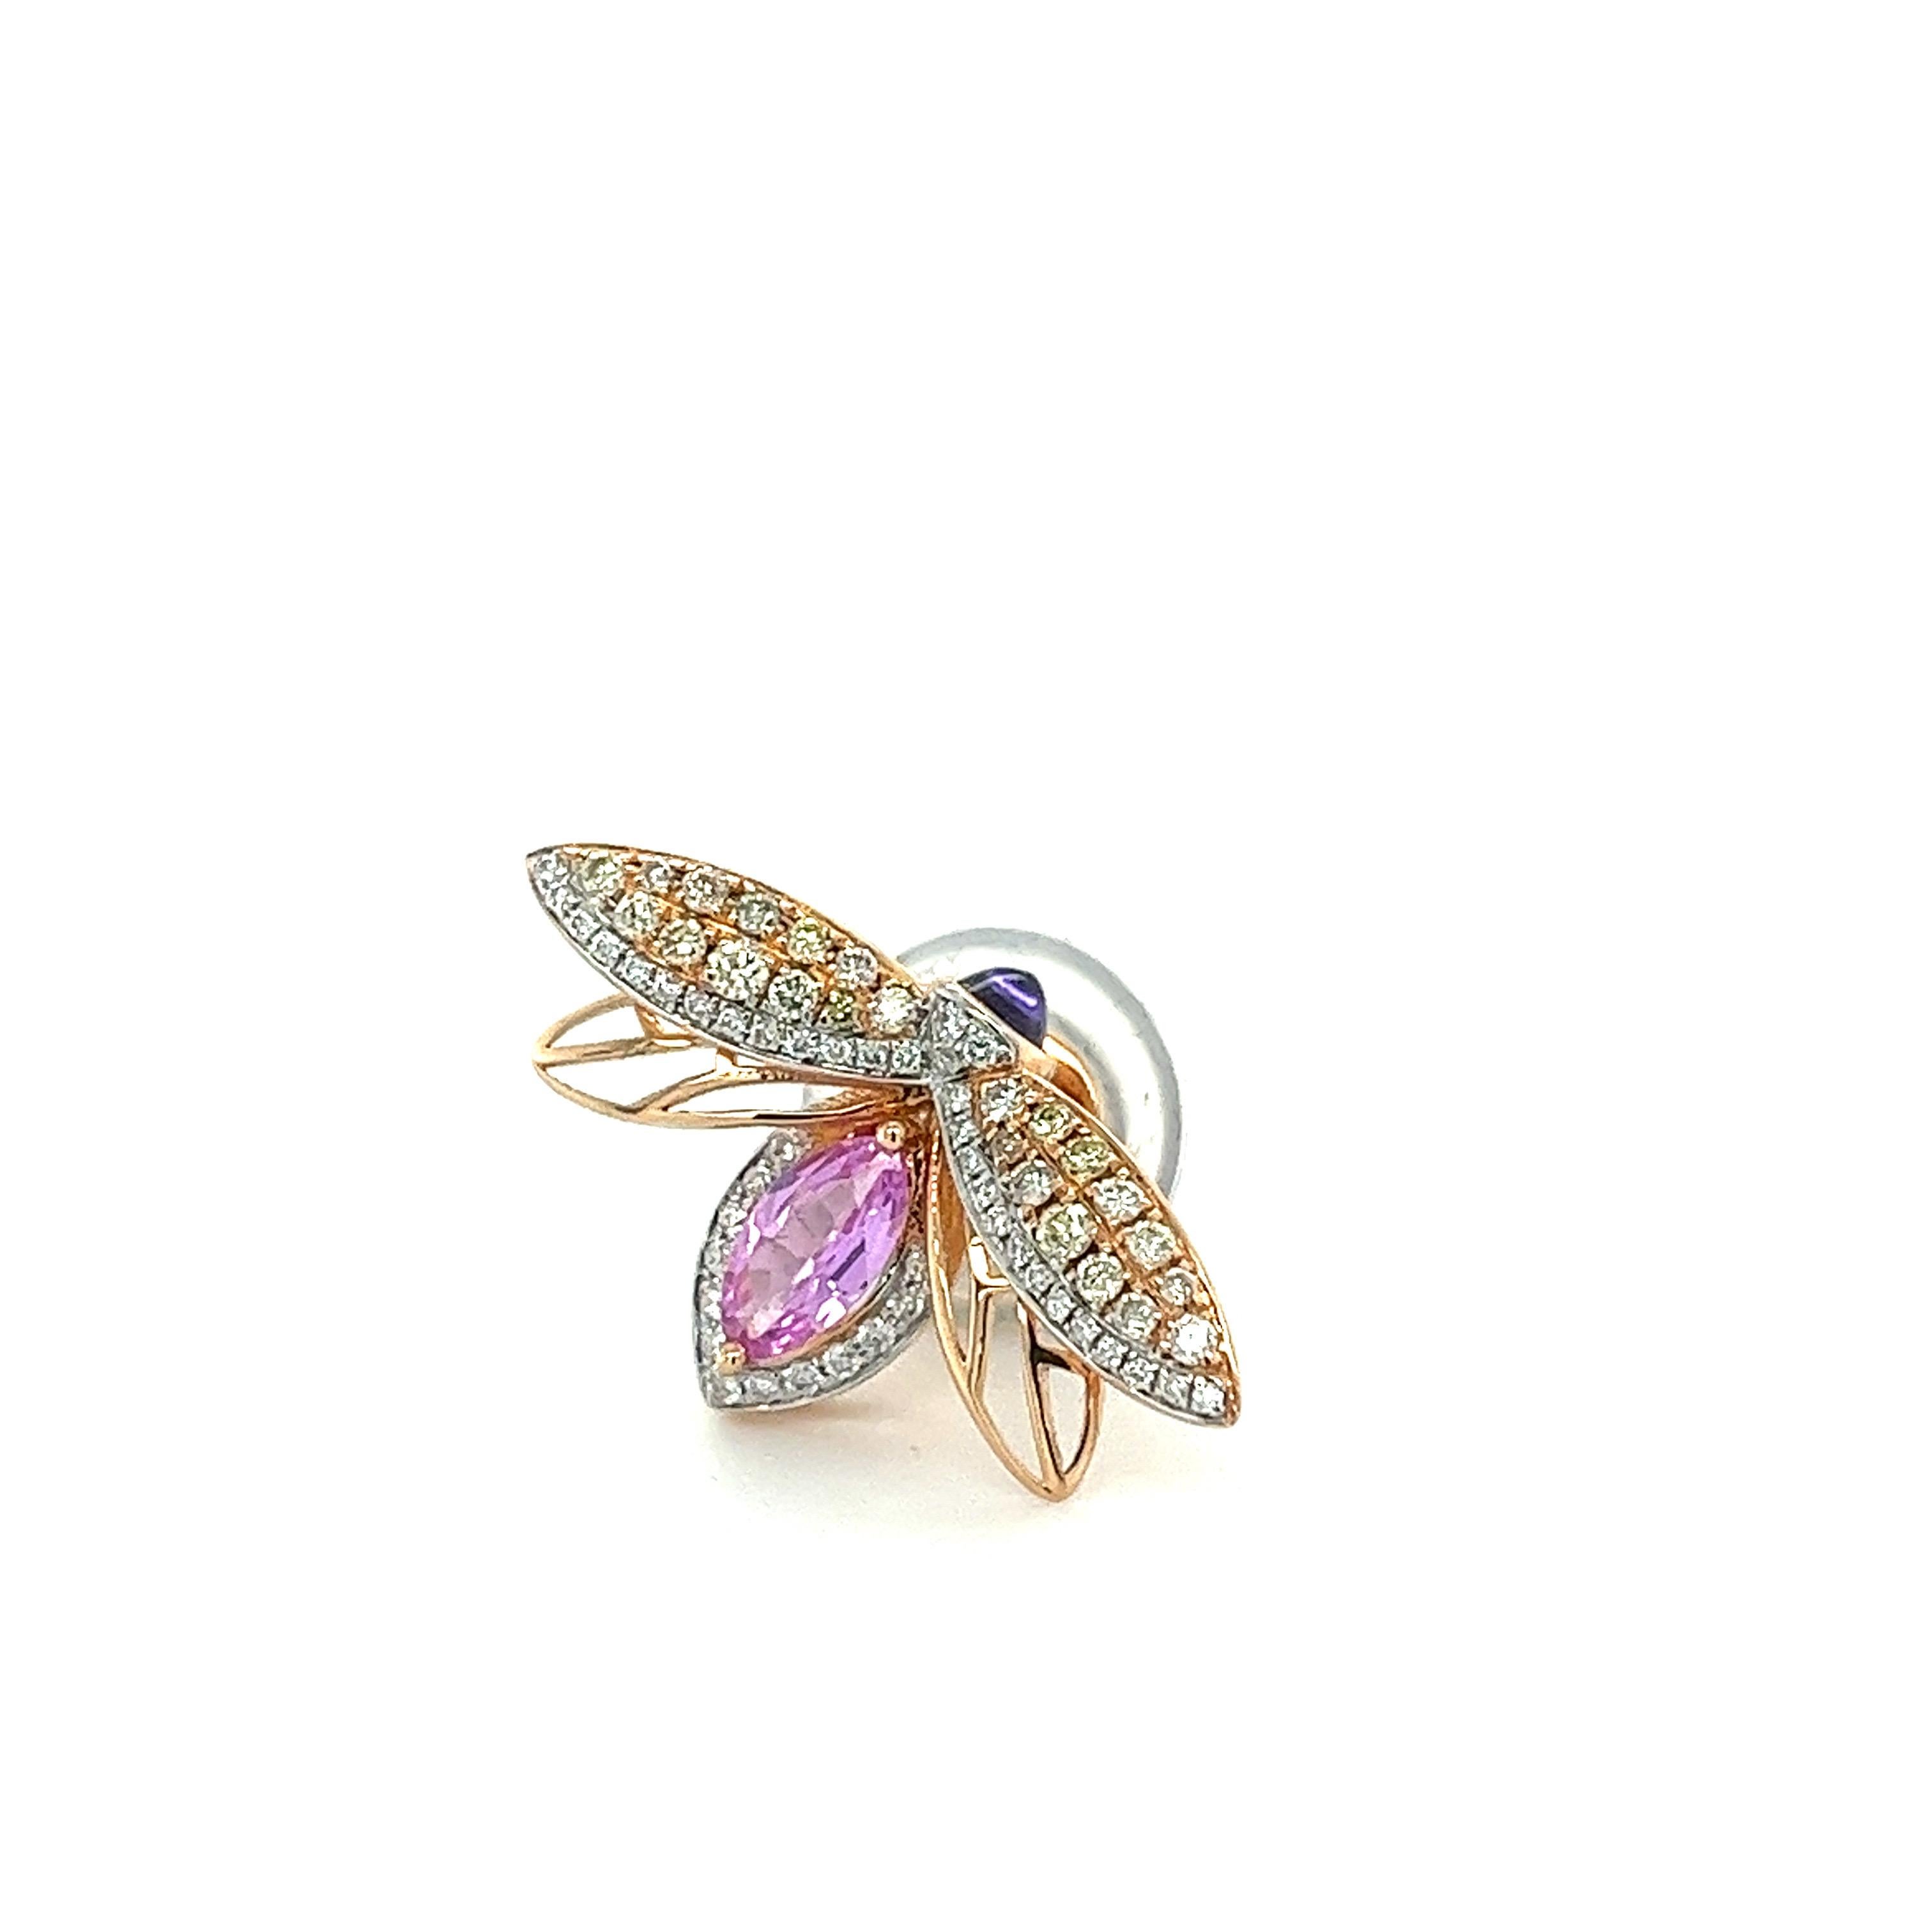 18K Rose Gold Pink Sapphire Diamonds Bee Brooch

42 Diamonds 0.16 CT
24 Fancy Diamonds 0.25 CT
1 Pink Sapphire  0.55 CT
1 Purple Sapphire 0.21 CT
18K Rose Gold 2.56  GM

Sapphire’s are celestial stones. They entice with their sparkling color, their